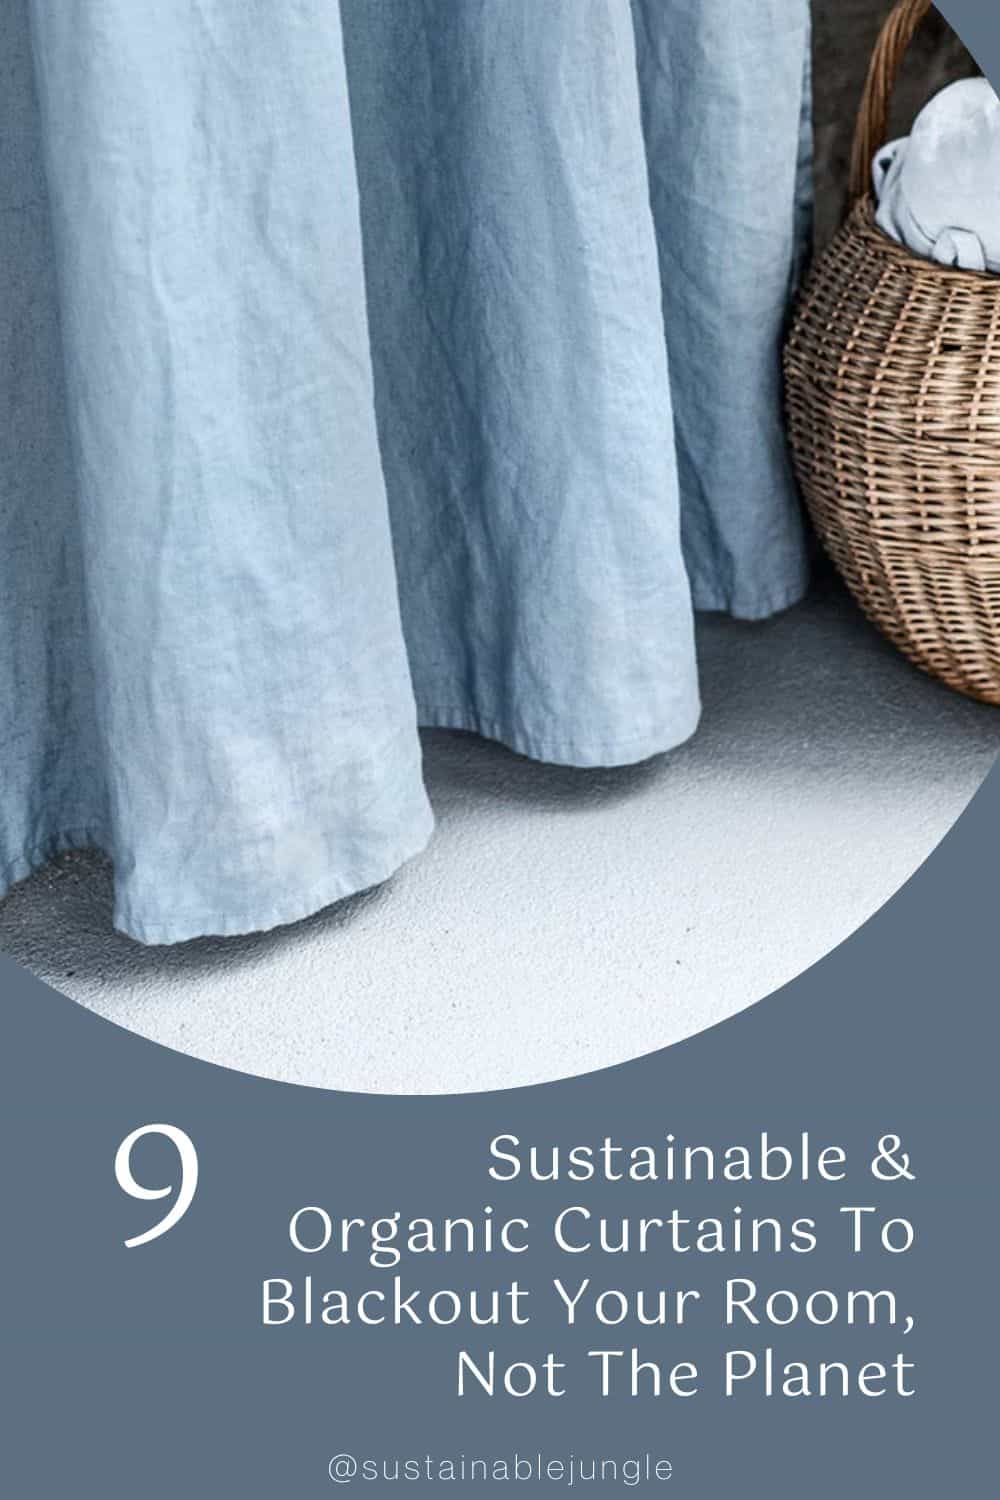 9 Sustainable & Organic Curtains To Blackout Your Room, Not The Planet Image by not PERFECT LINEN #organiccurtains #organicblackoutcurtains #sustainablecurtains #organicdrapes #sustainablelinencurtains #sustainablejungle